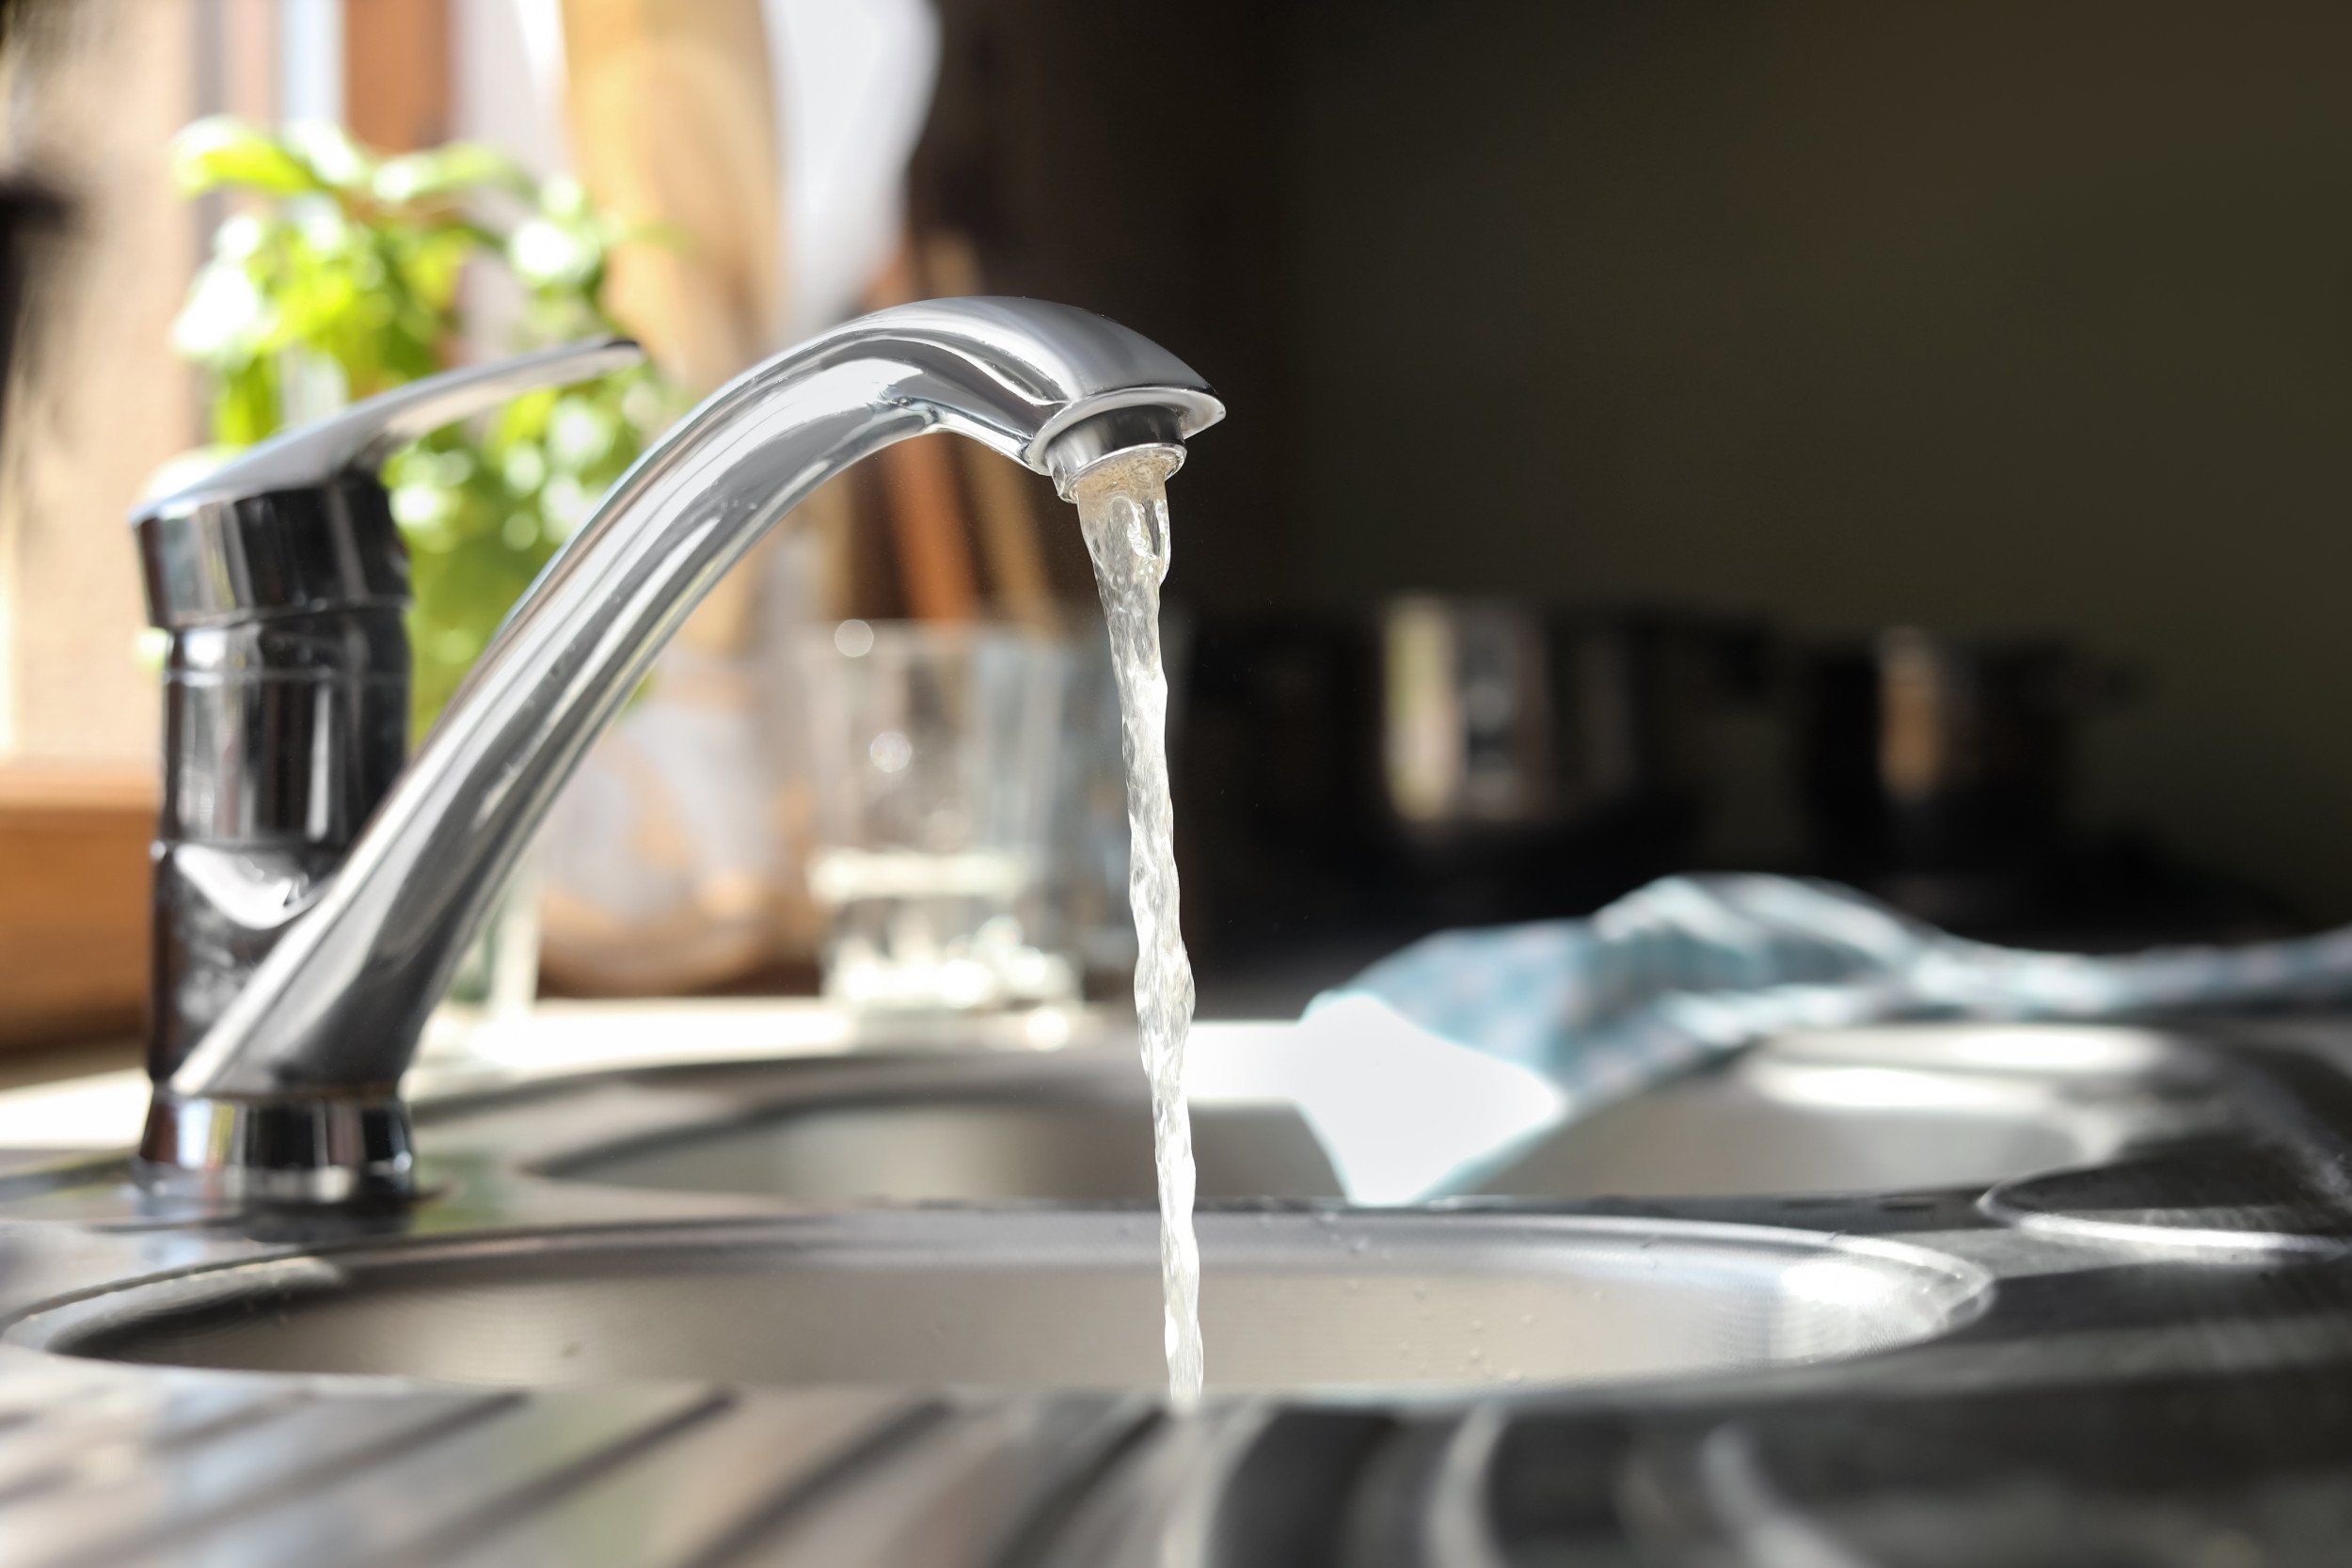 Drinking Water Warning Issued for City in Kansas